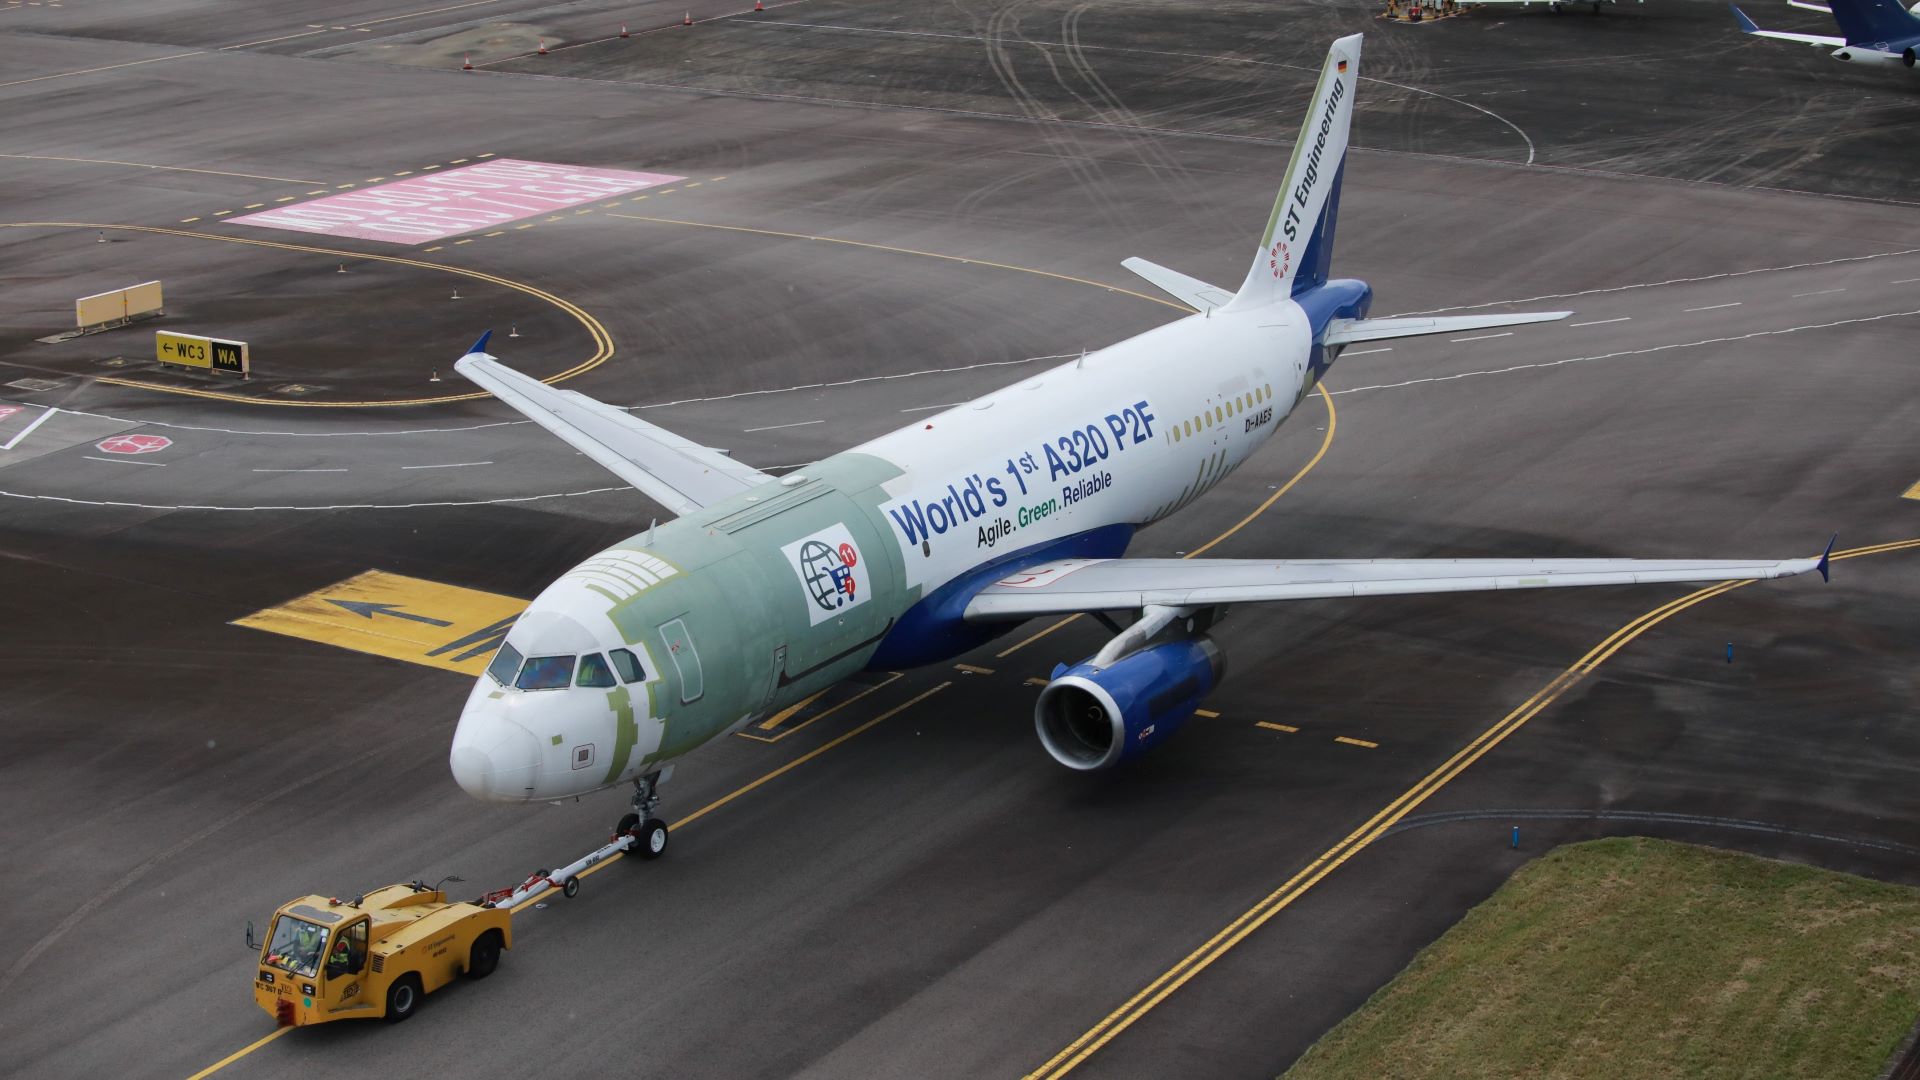 A white plane being towed by a tug with writing on fuselage "World's first A321 P2F"